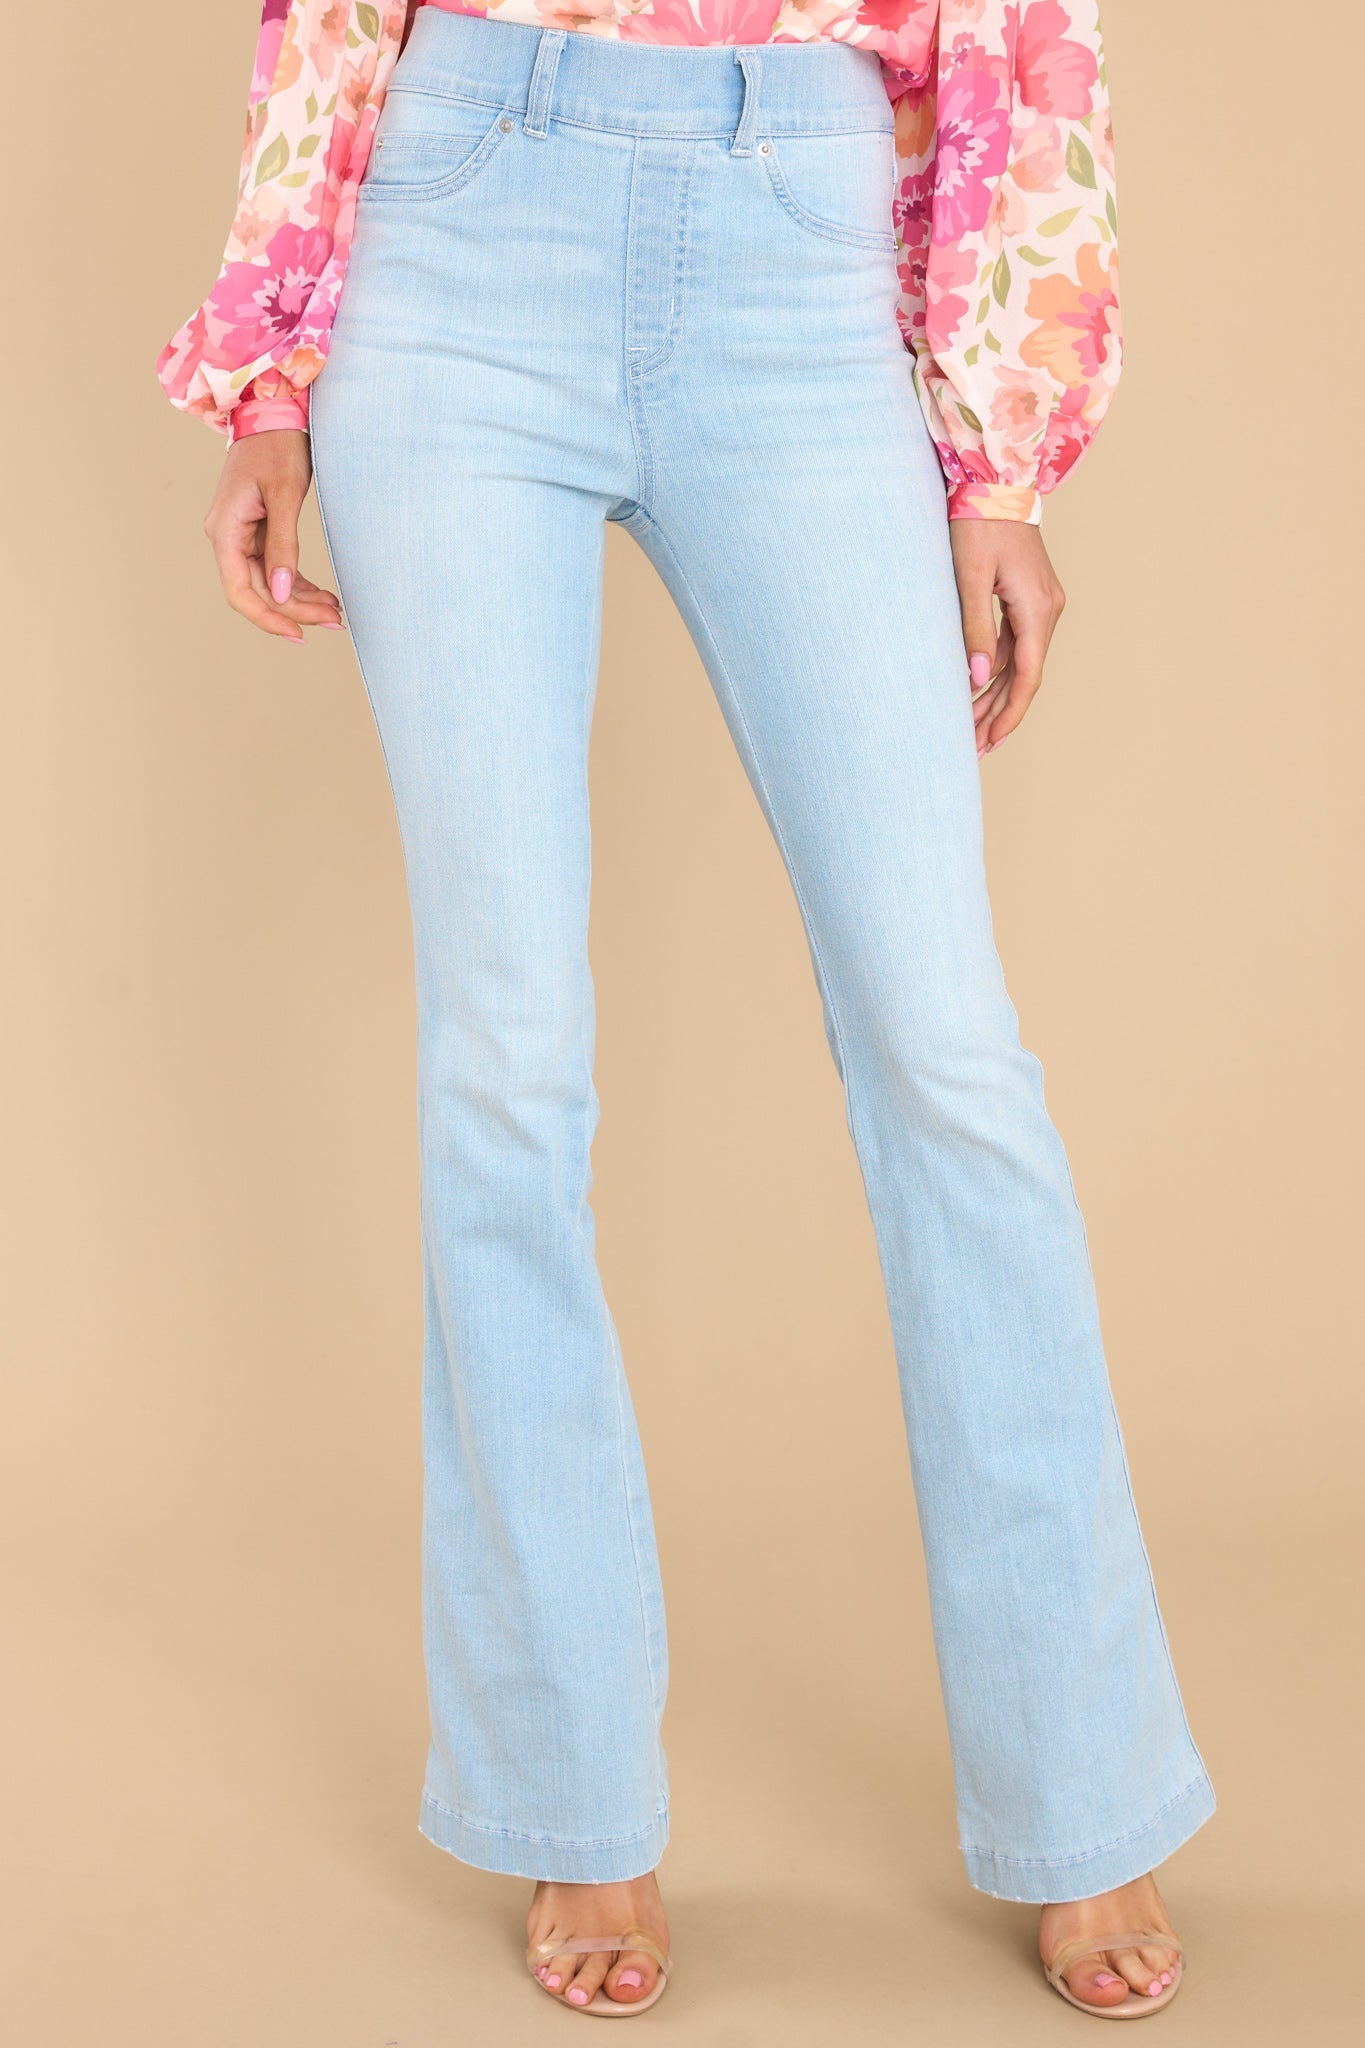 Spanx's Flare Jeans Are A Must-Have For Fall